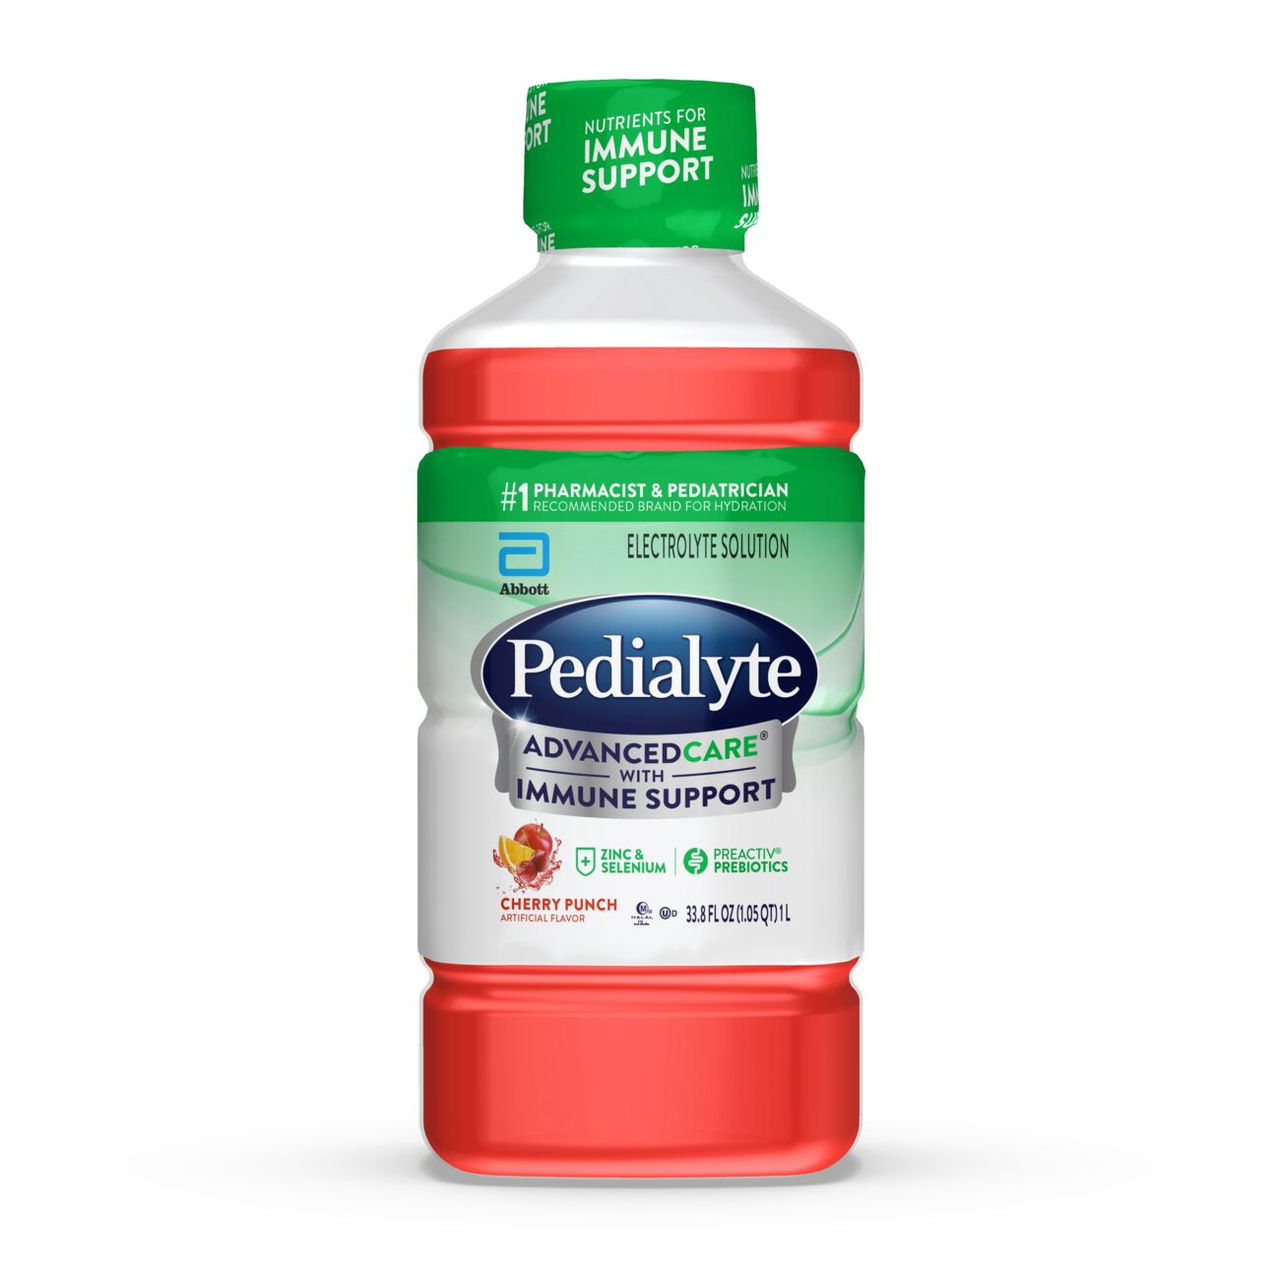 Pedialyte AdvanceCare Cherry Punch flavor